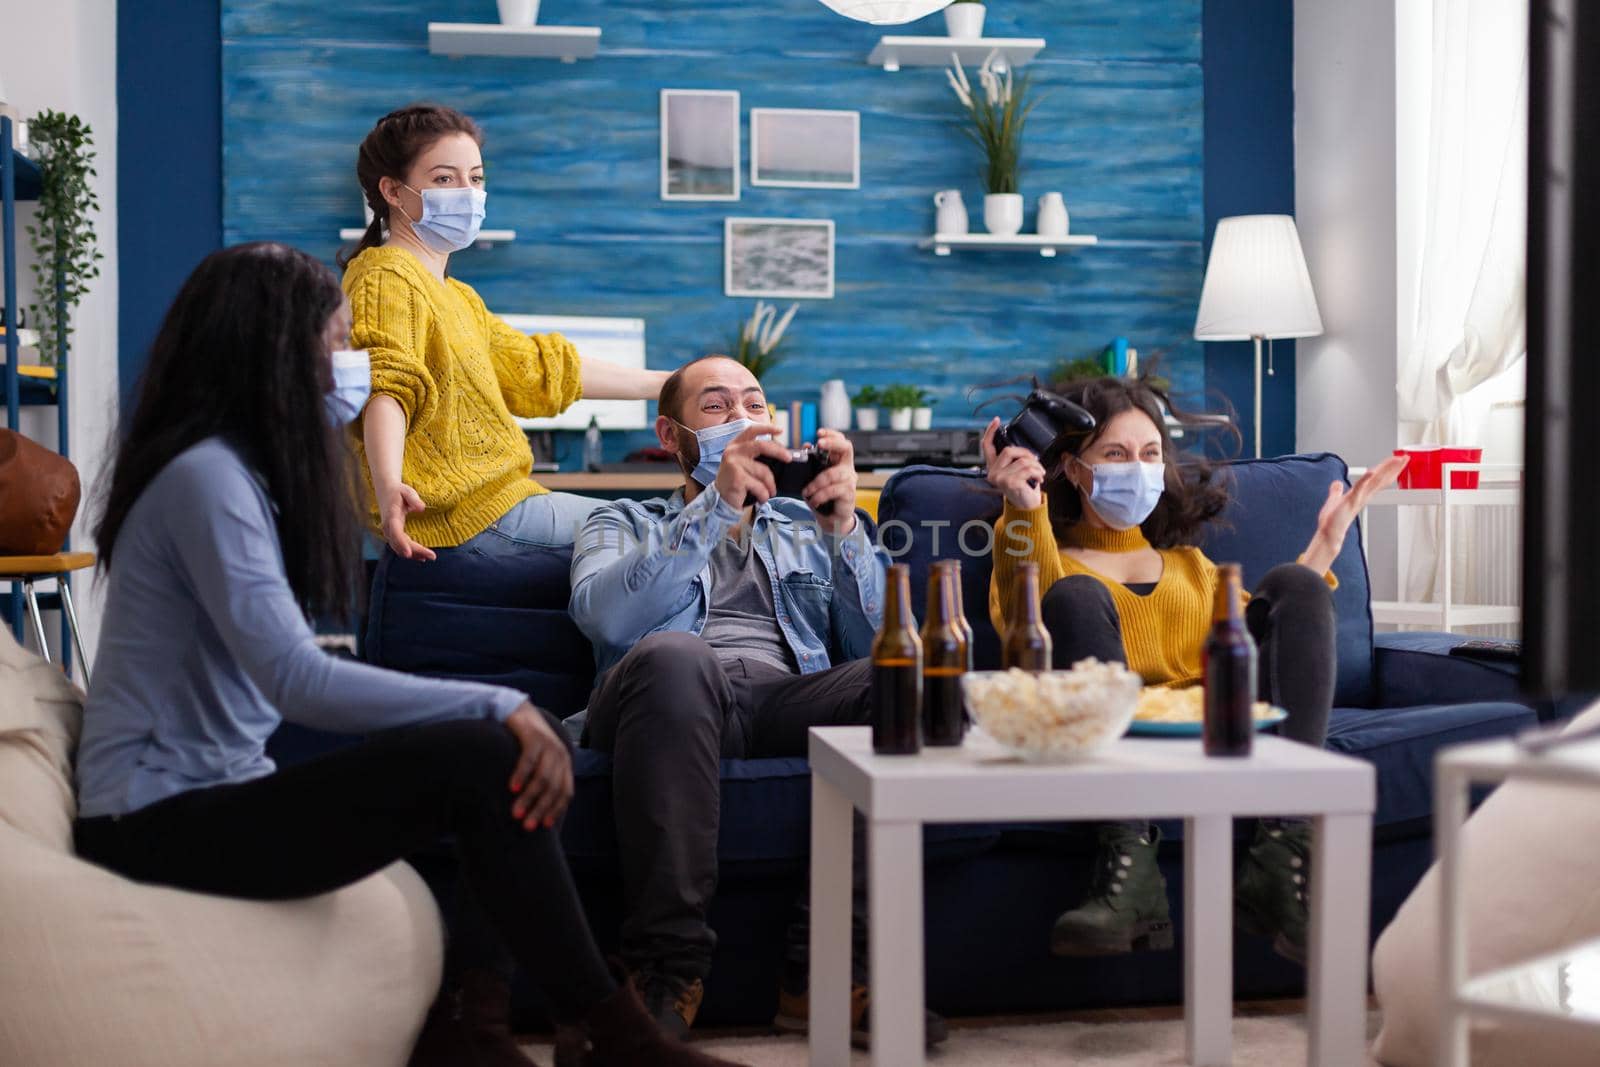 Excited group of multi ethnic friends scraming celebrating victory during gaming competition wearing face mask keeping social distancing to prevent coronavirus spread in time of global pandemic.